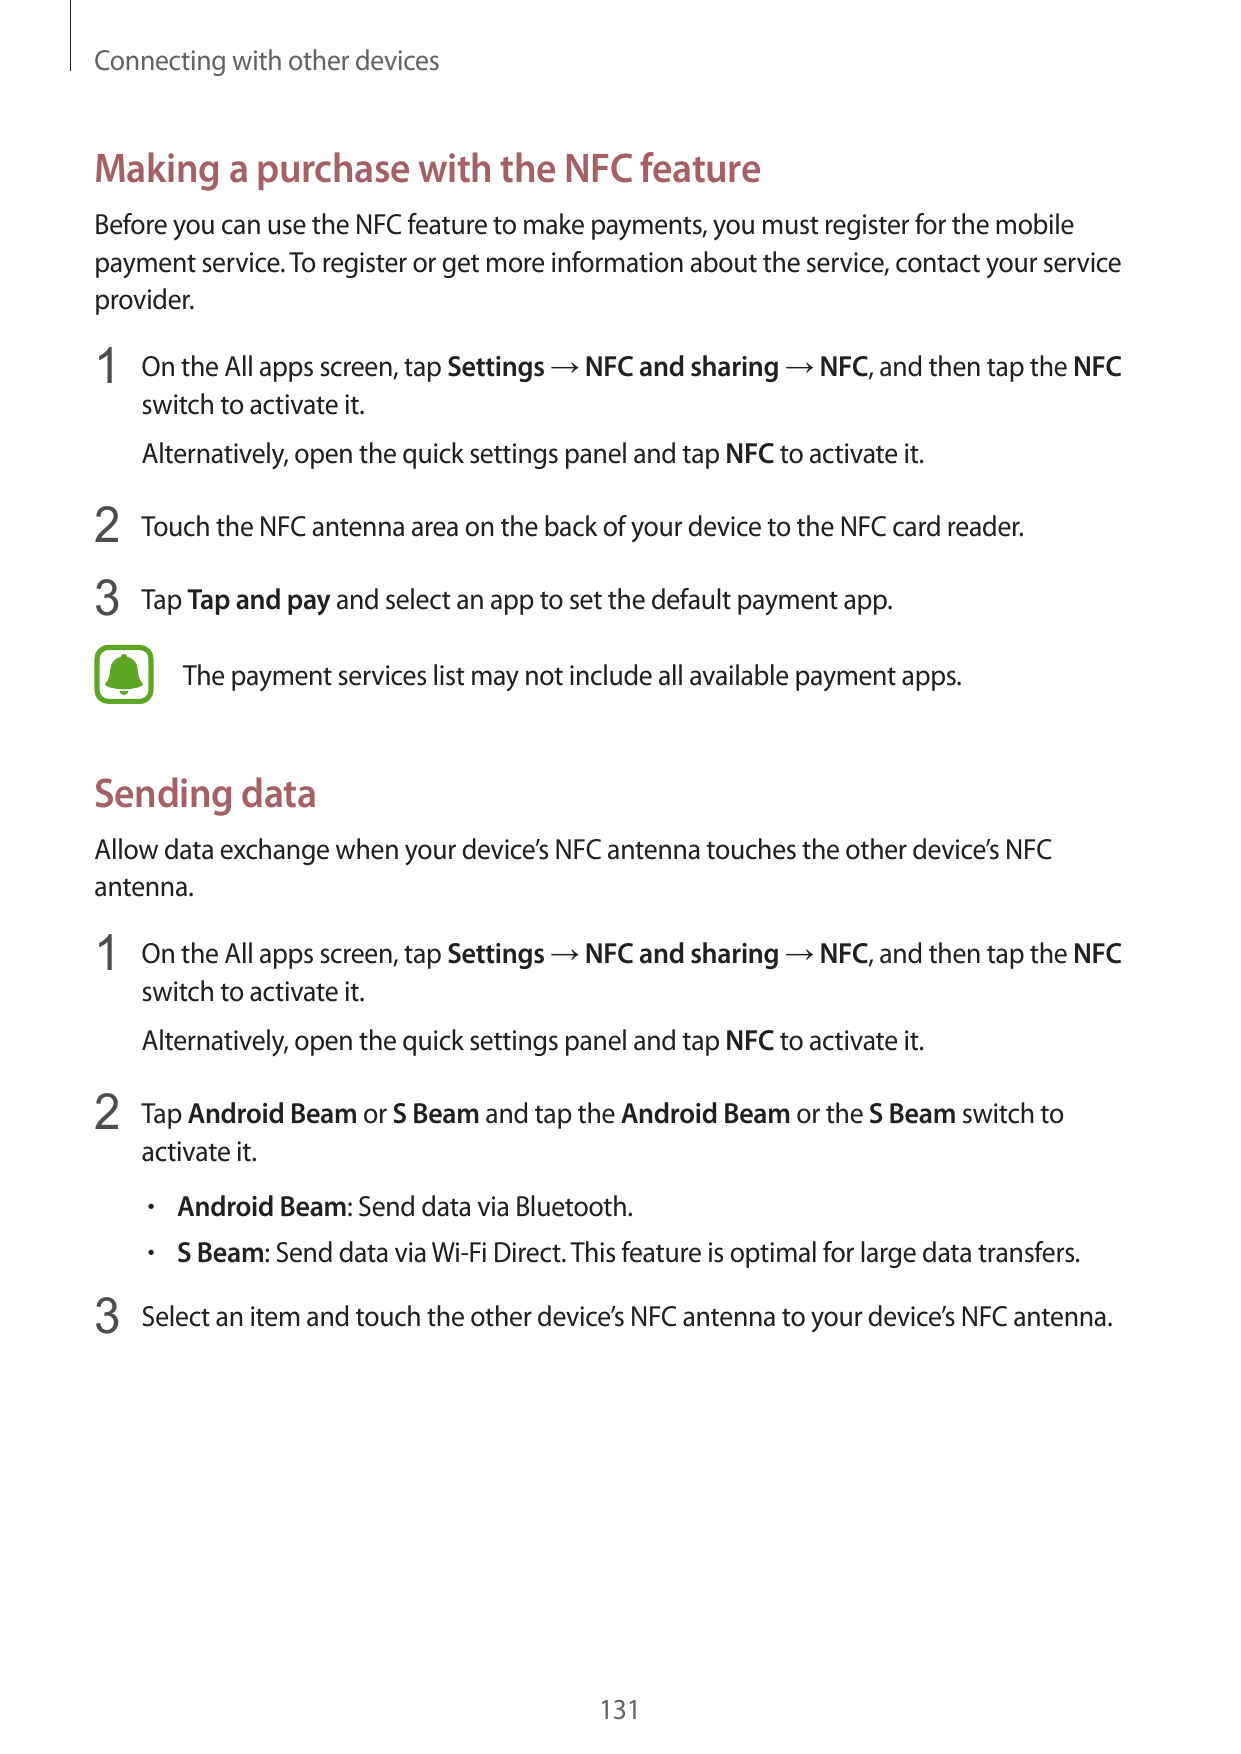 Connecting with other devicesMaking a purchase with the NFC featureBefore you can use the NFC feature to make payments, you must